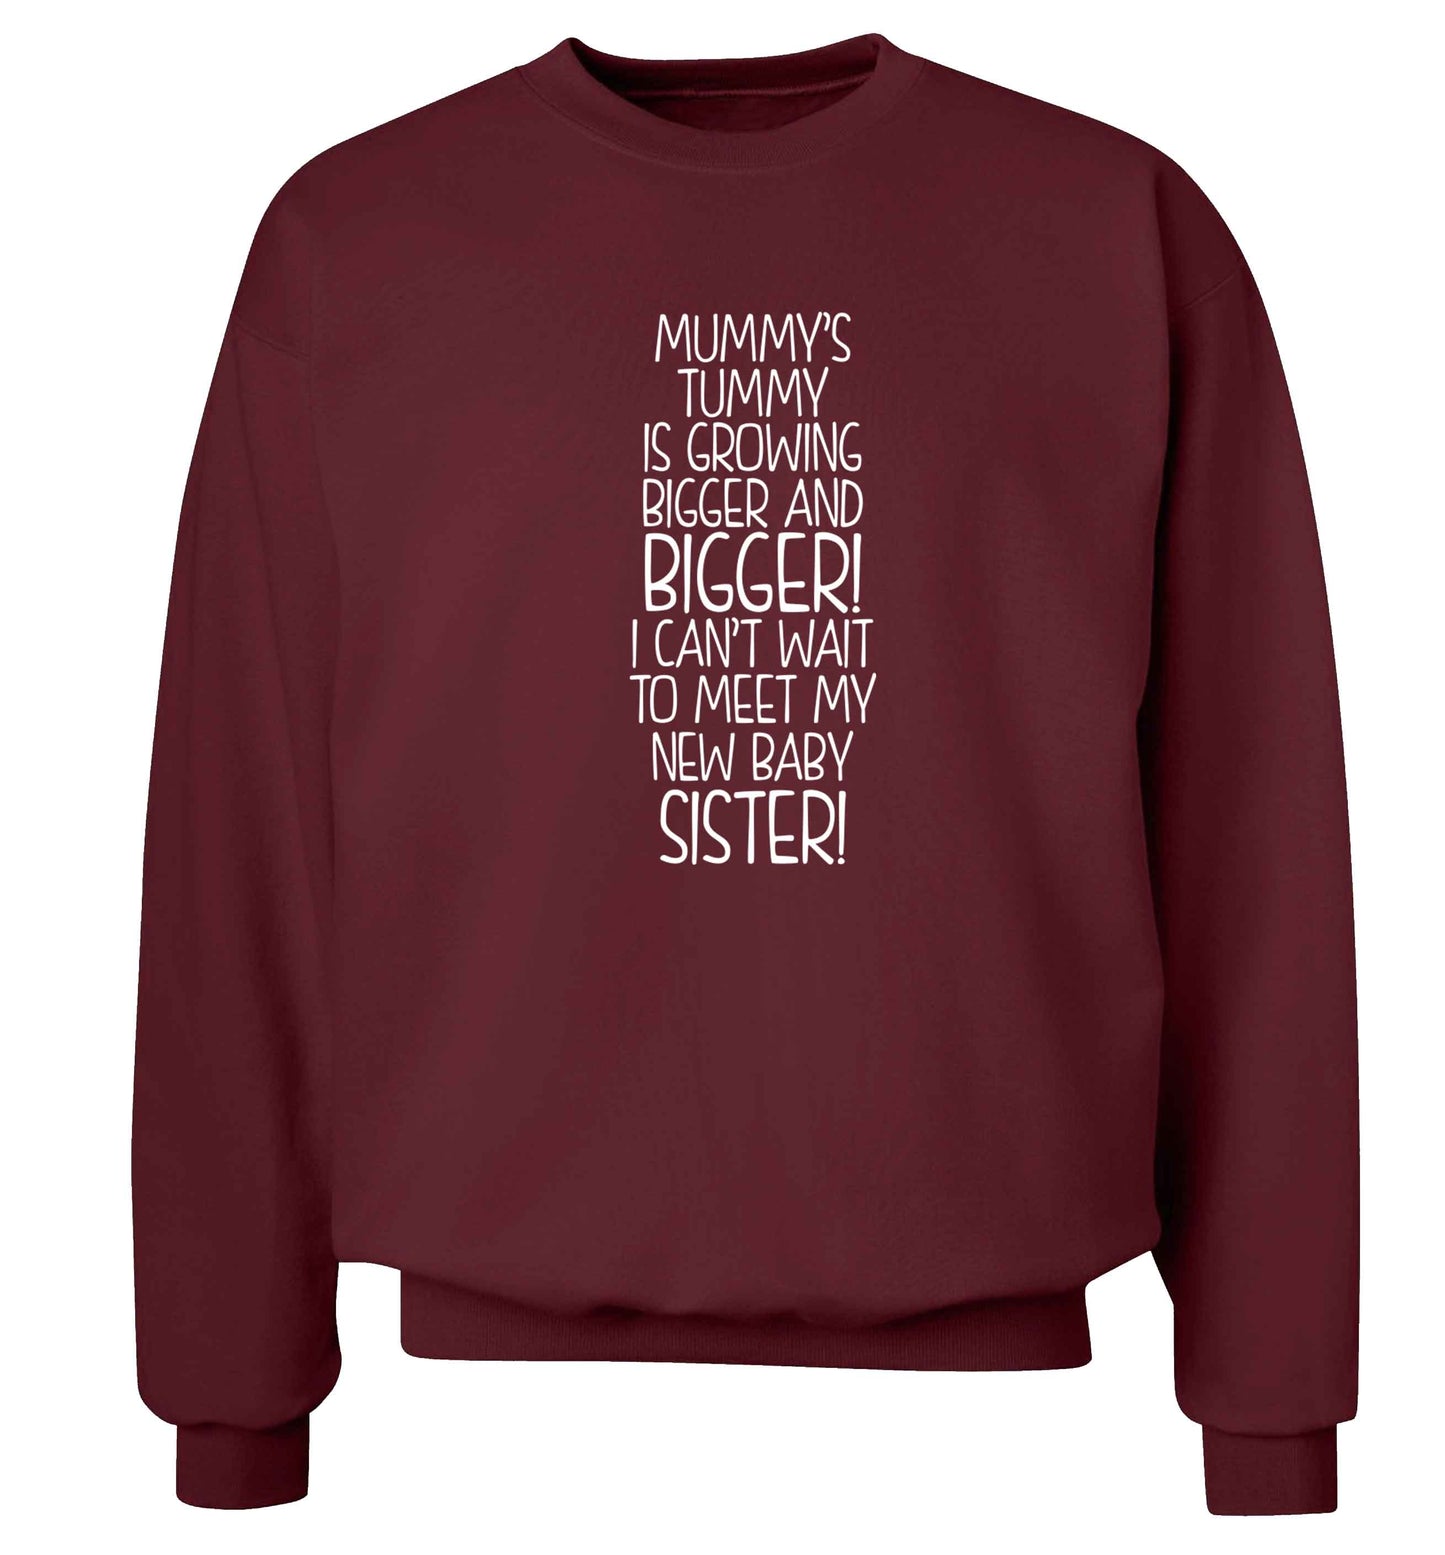 Mummy's tummy is growing bigger and bigger I can't wait to meet my new baby sister! Adult's unisex maroon Sweater 2XL